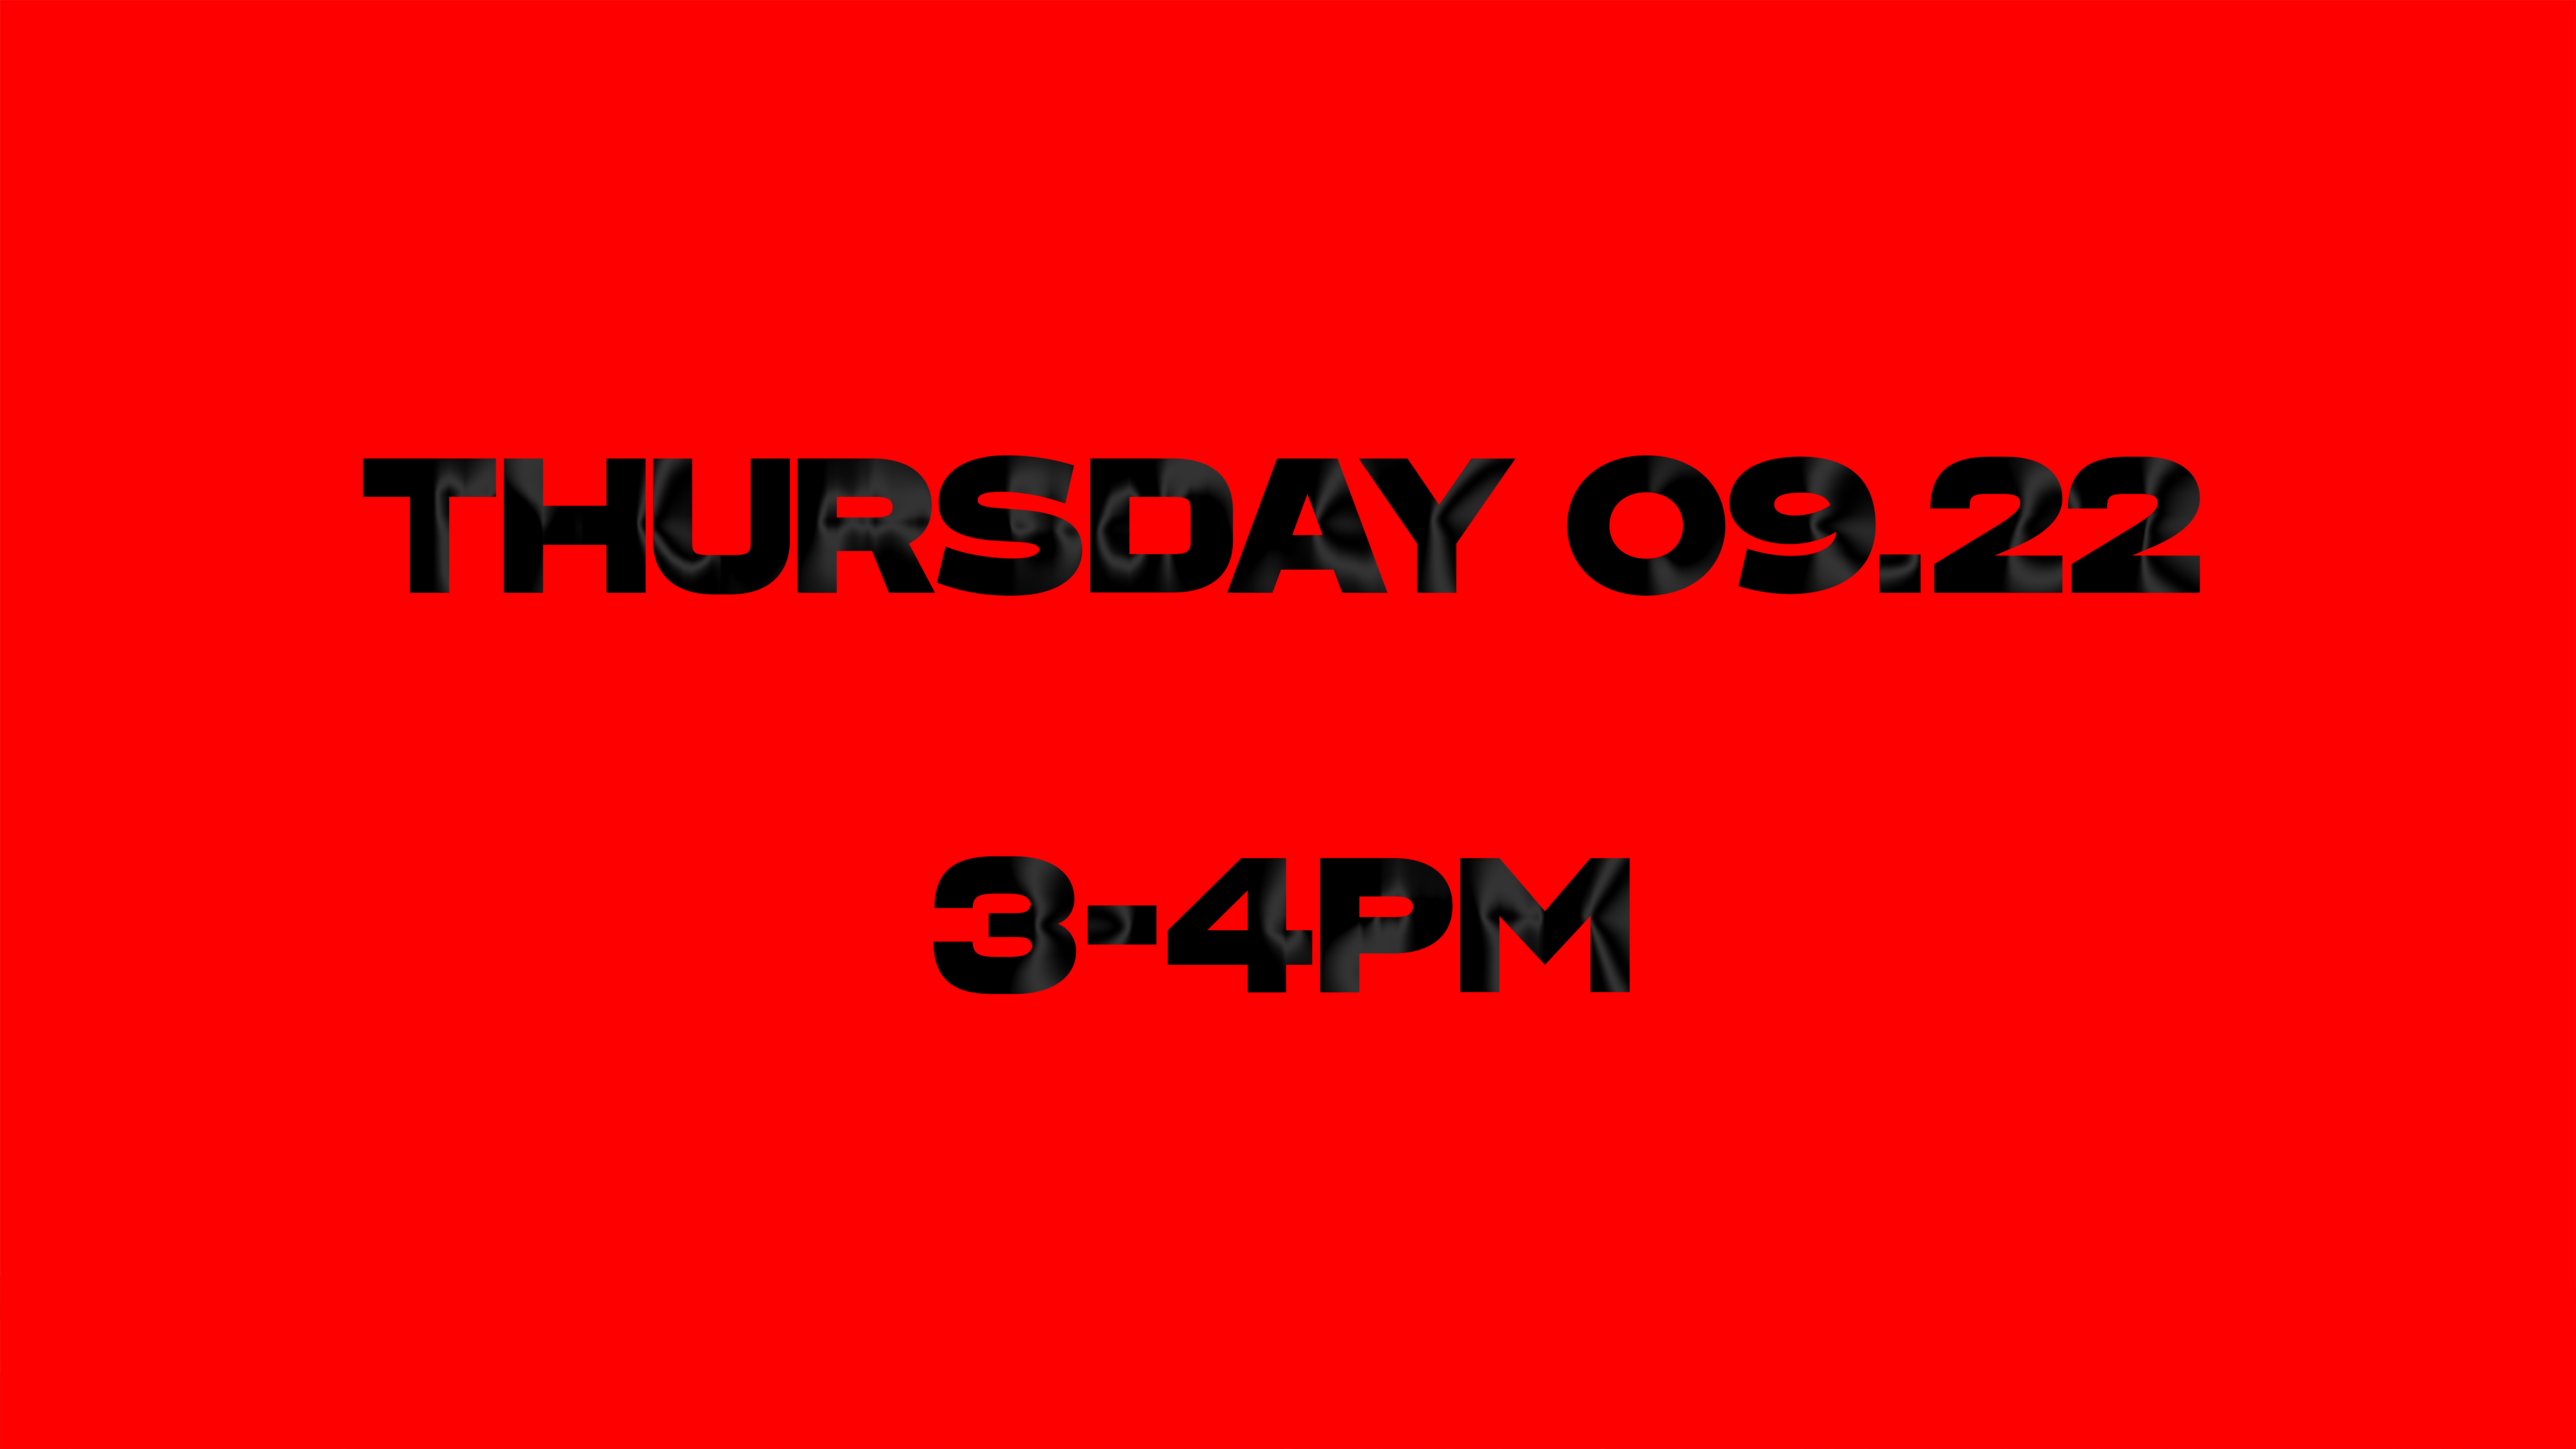 thursday 09.22 3-4PM written in black on red background